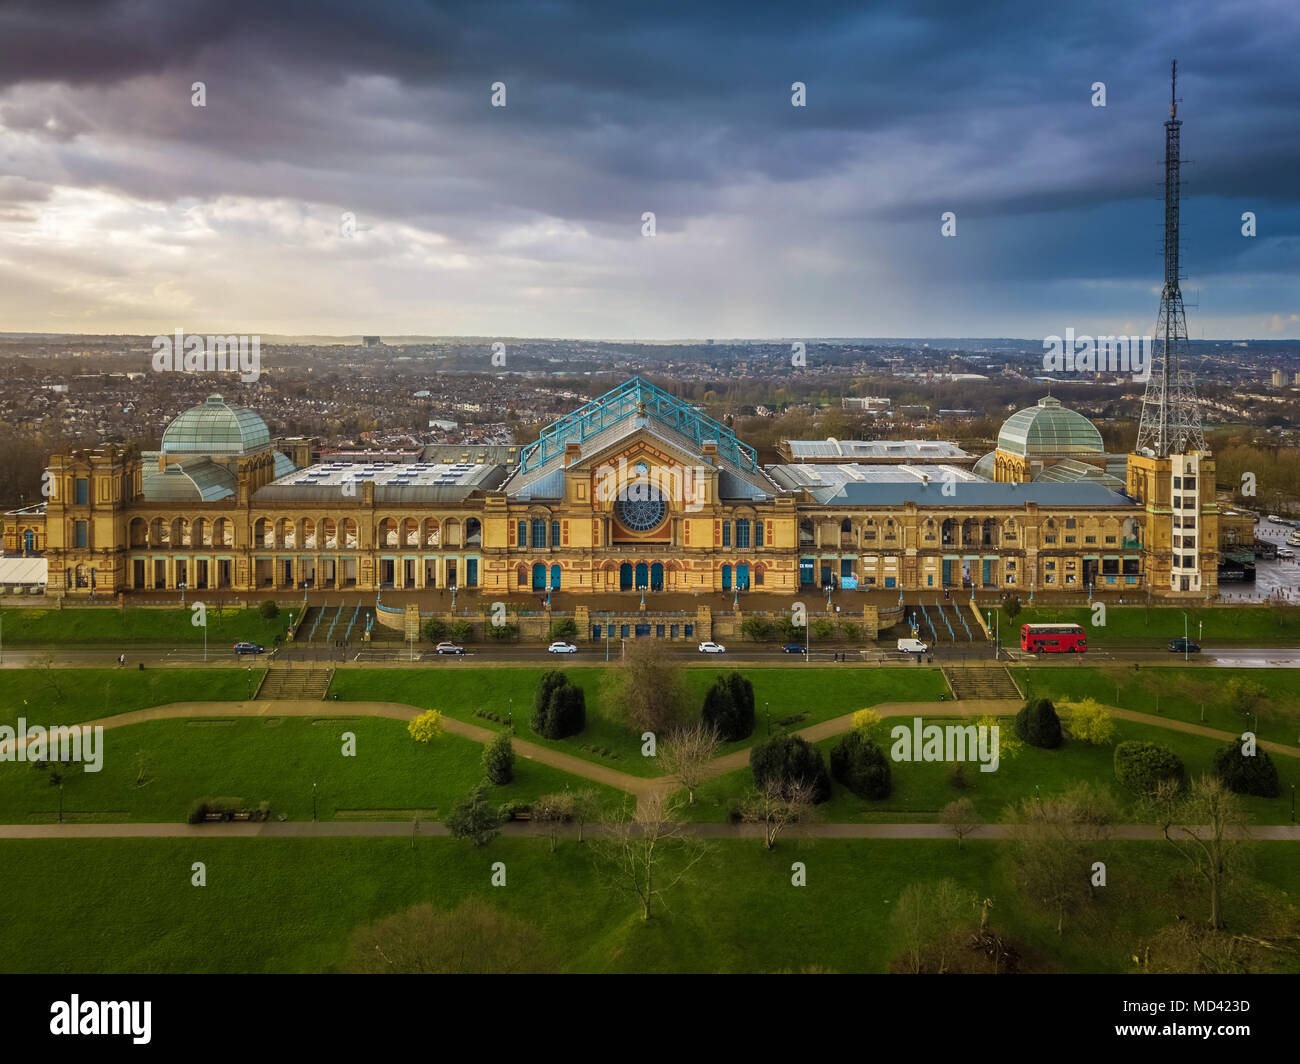 London, England - Aerial panromaic view of Alexandra Palace in Alexandra Park with iconic red double-decker bus and dramatic clouds behind Stock Photo